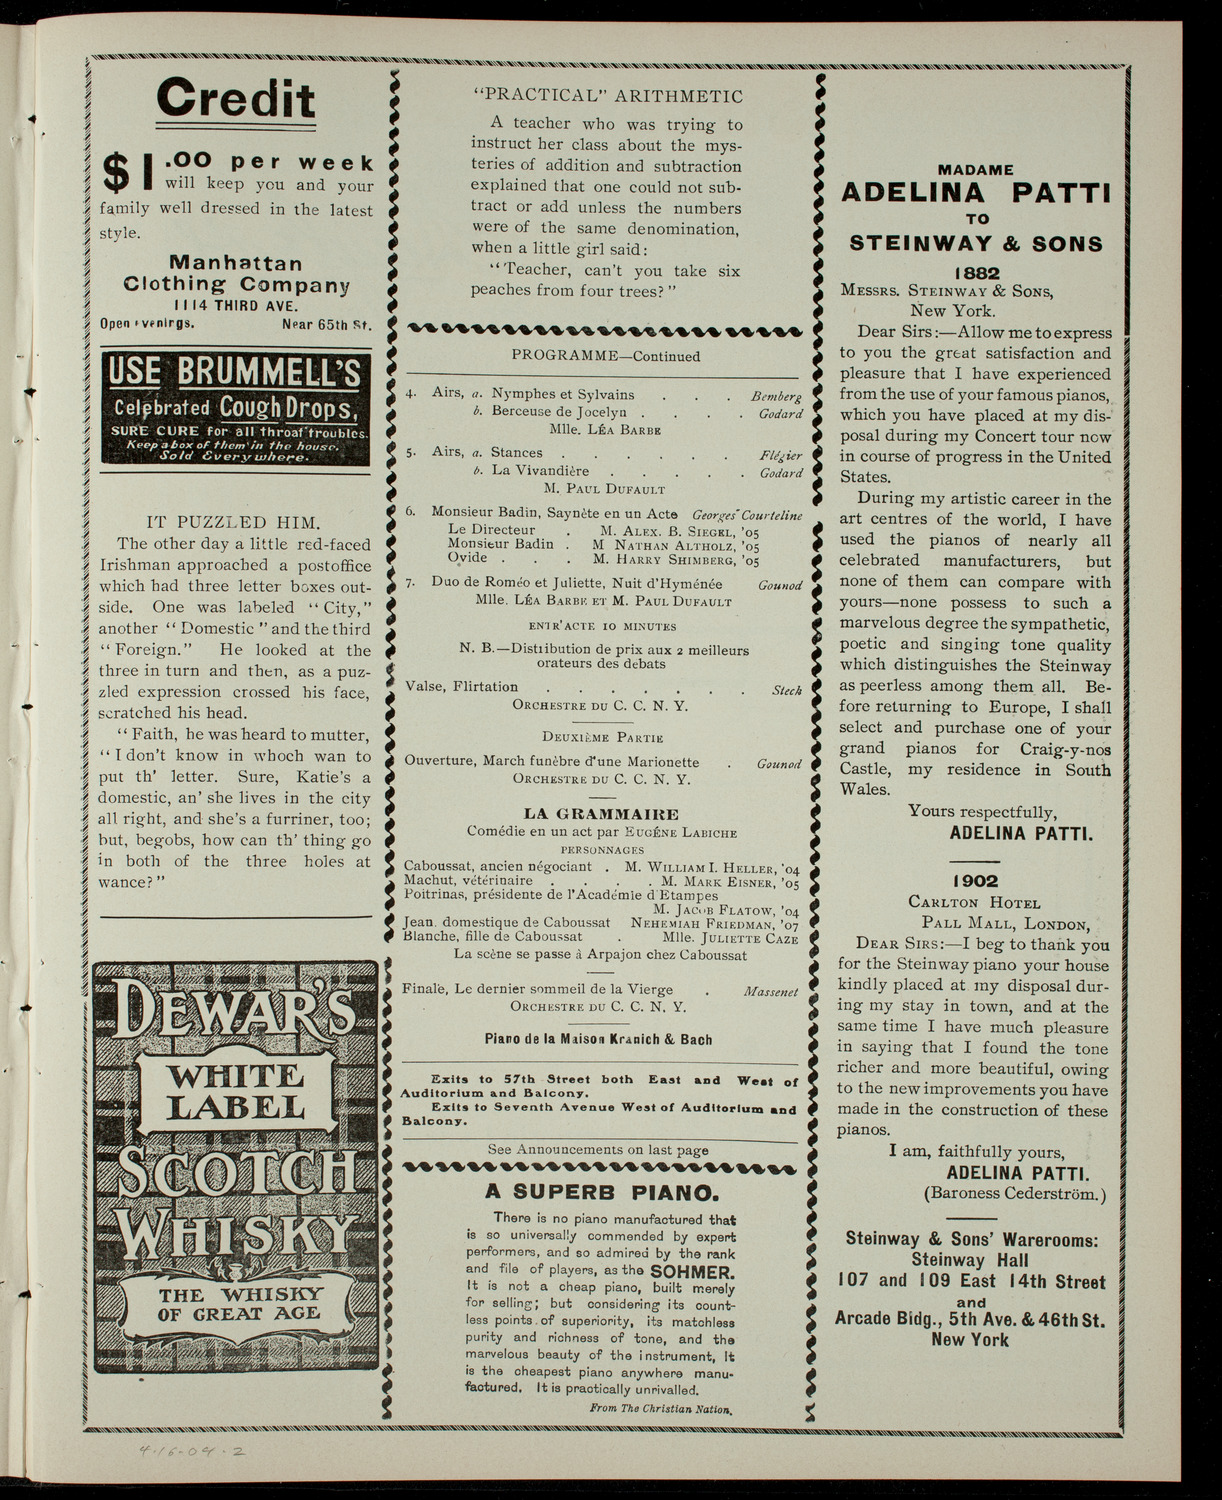 Cercle Francais of the College of the City of New York, April 16, 1904, program page 3